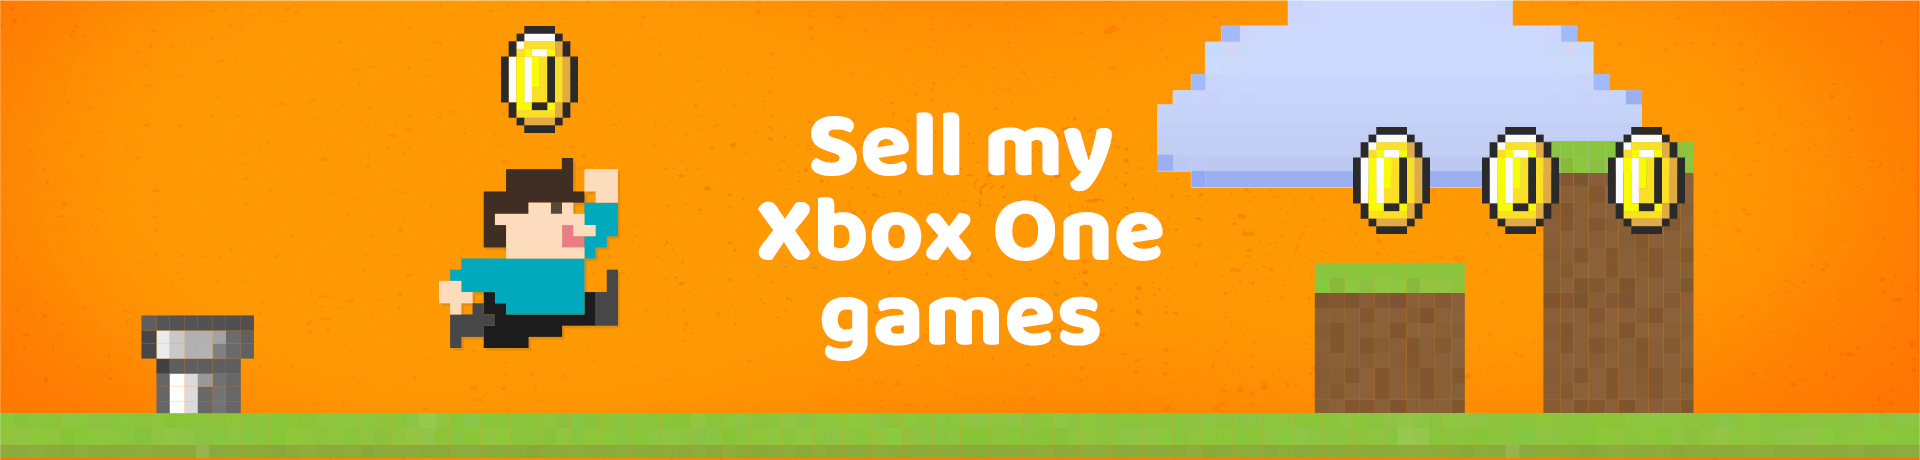 Sell Xbox Games